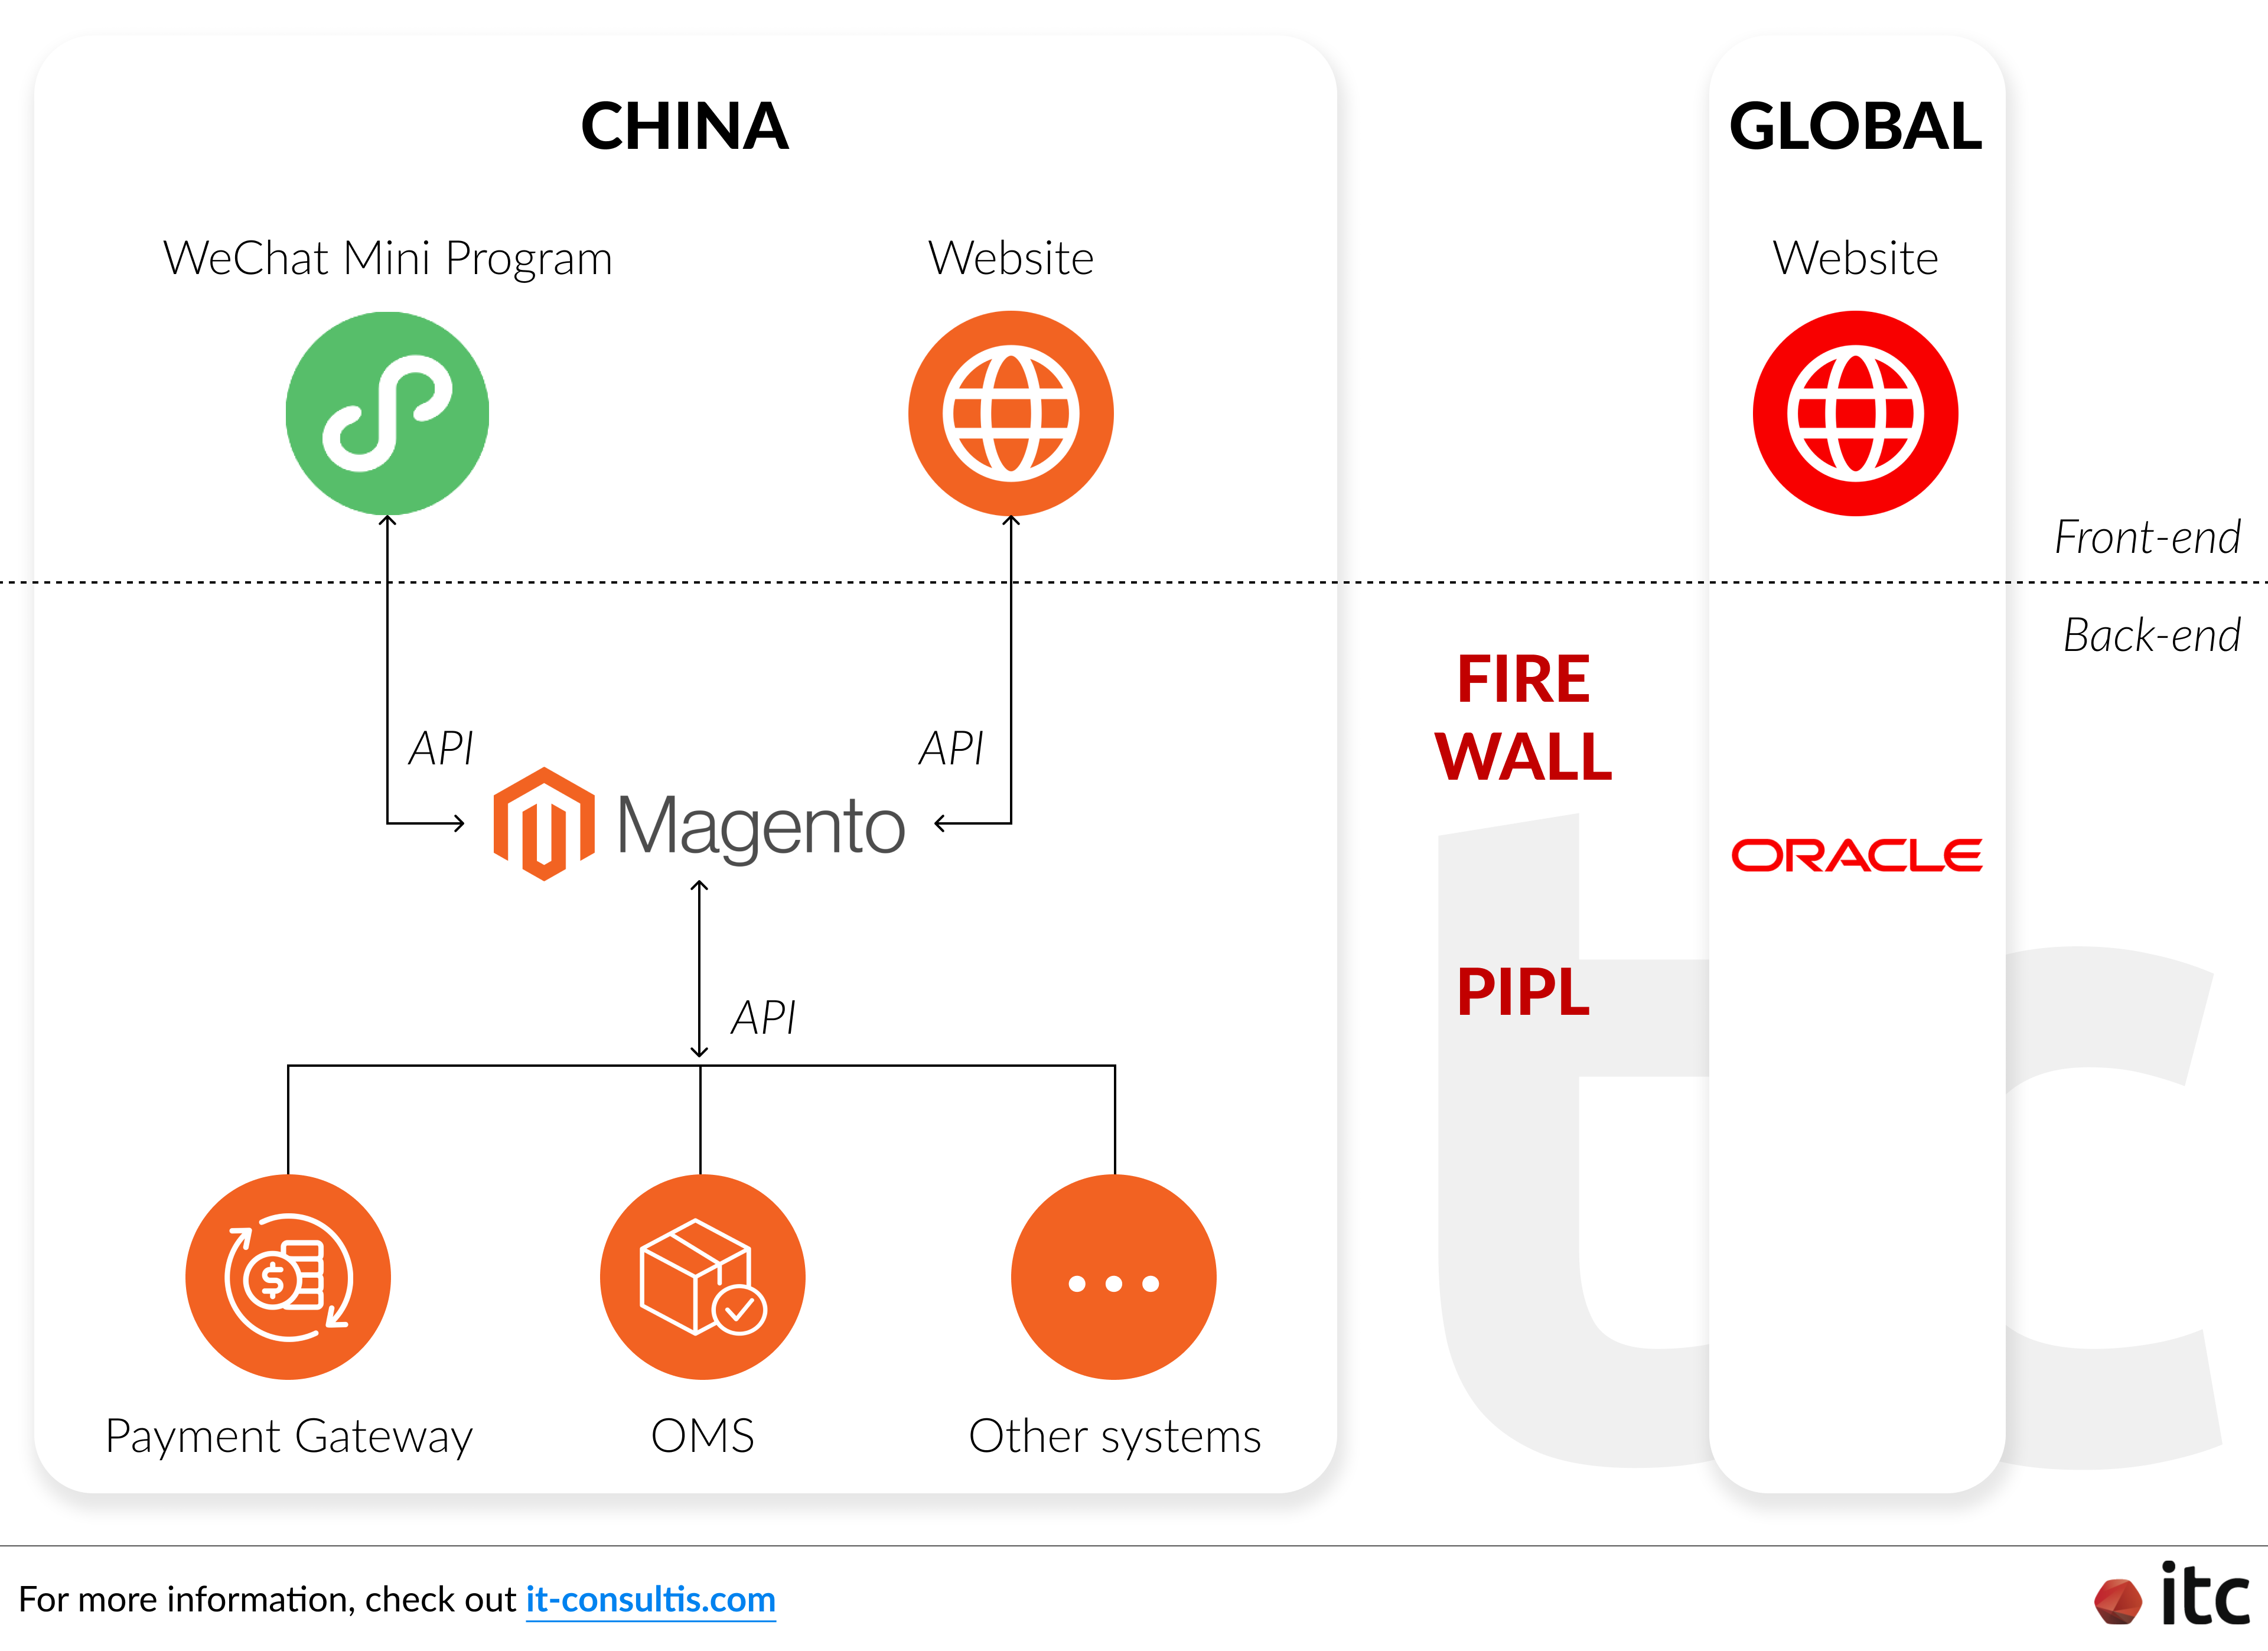 If you are leveraging Oracle Commerce Cloud for your global e-Commerce engines, you will need to opt for Magento when building your eCommerce website or eCommerce WeChat Mini Program in China